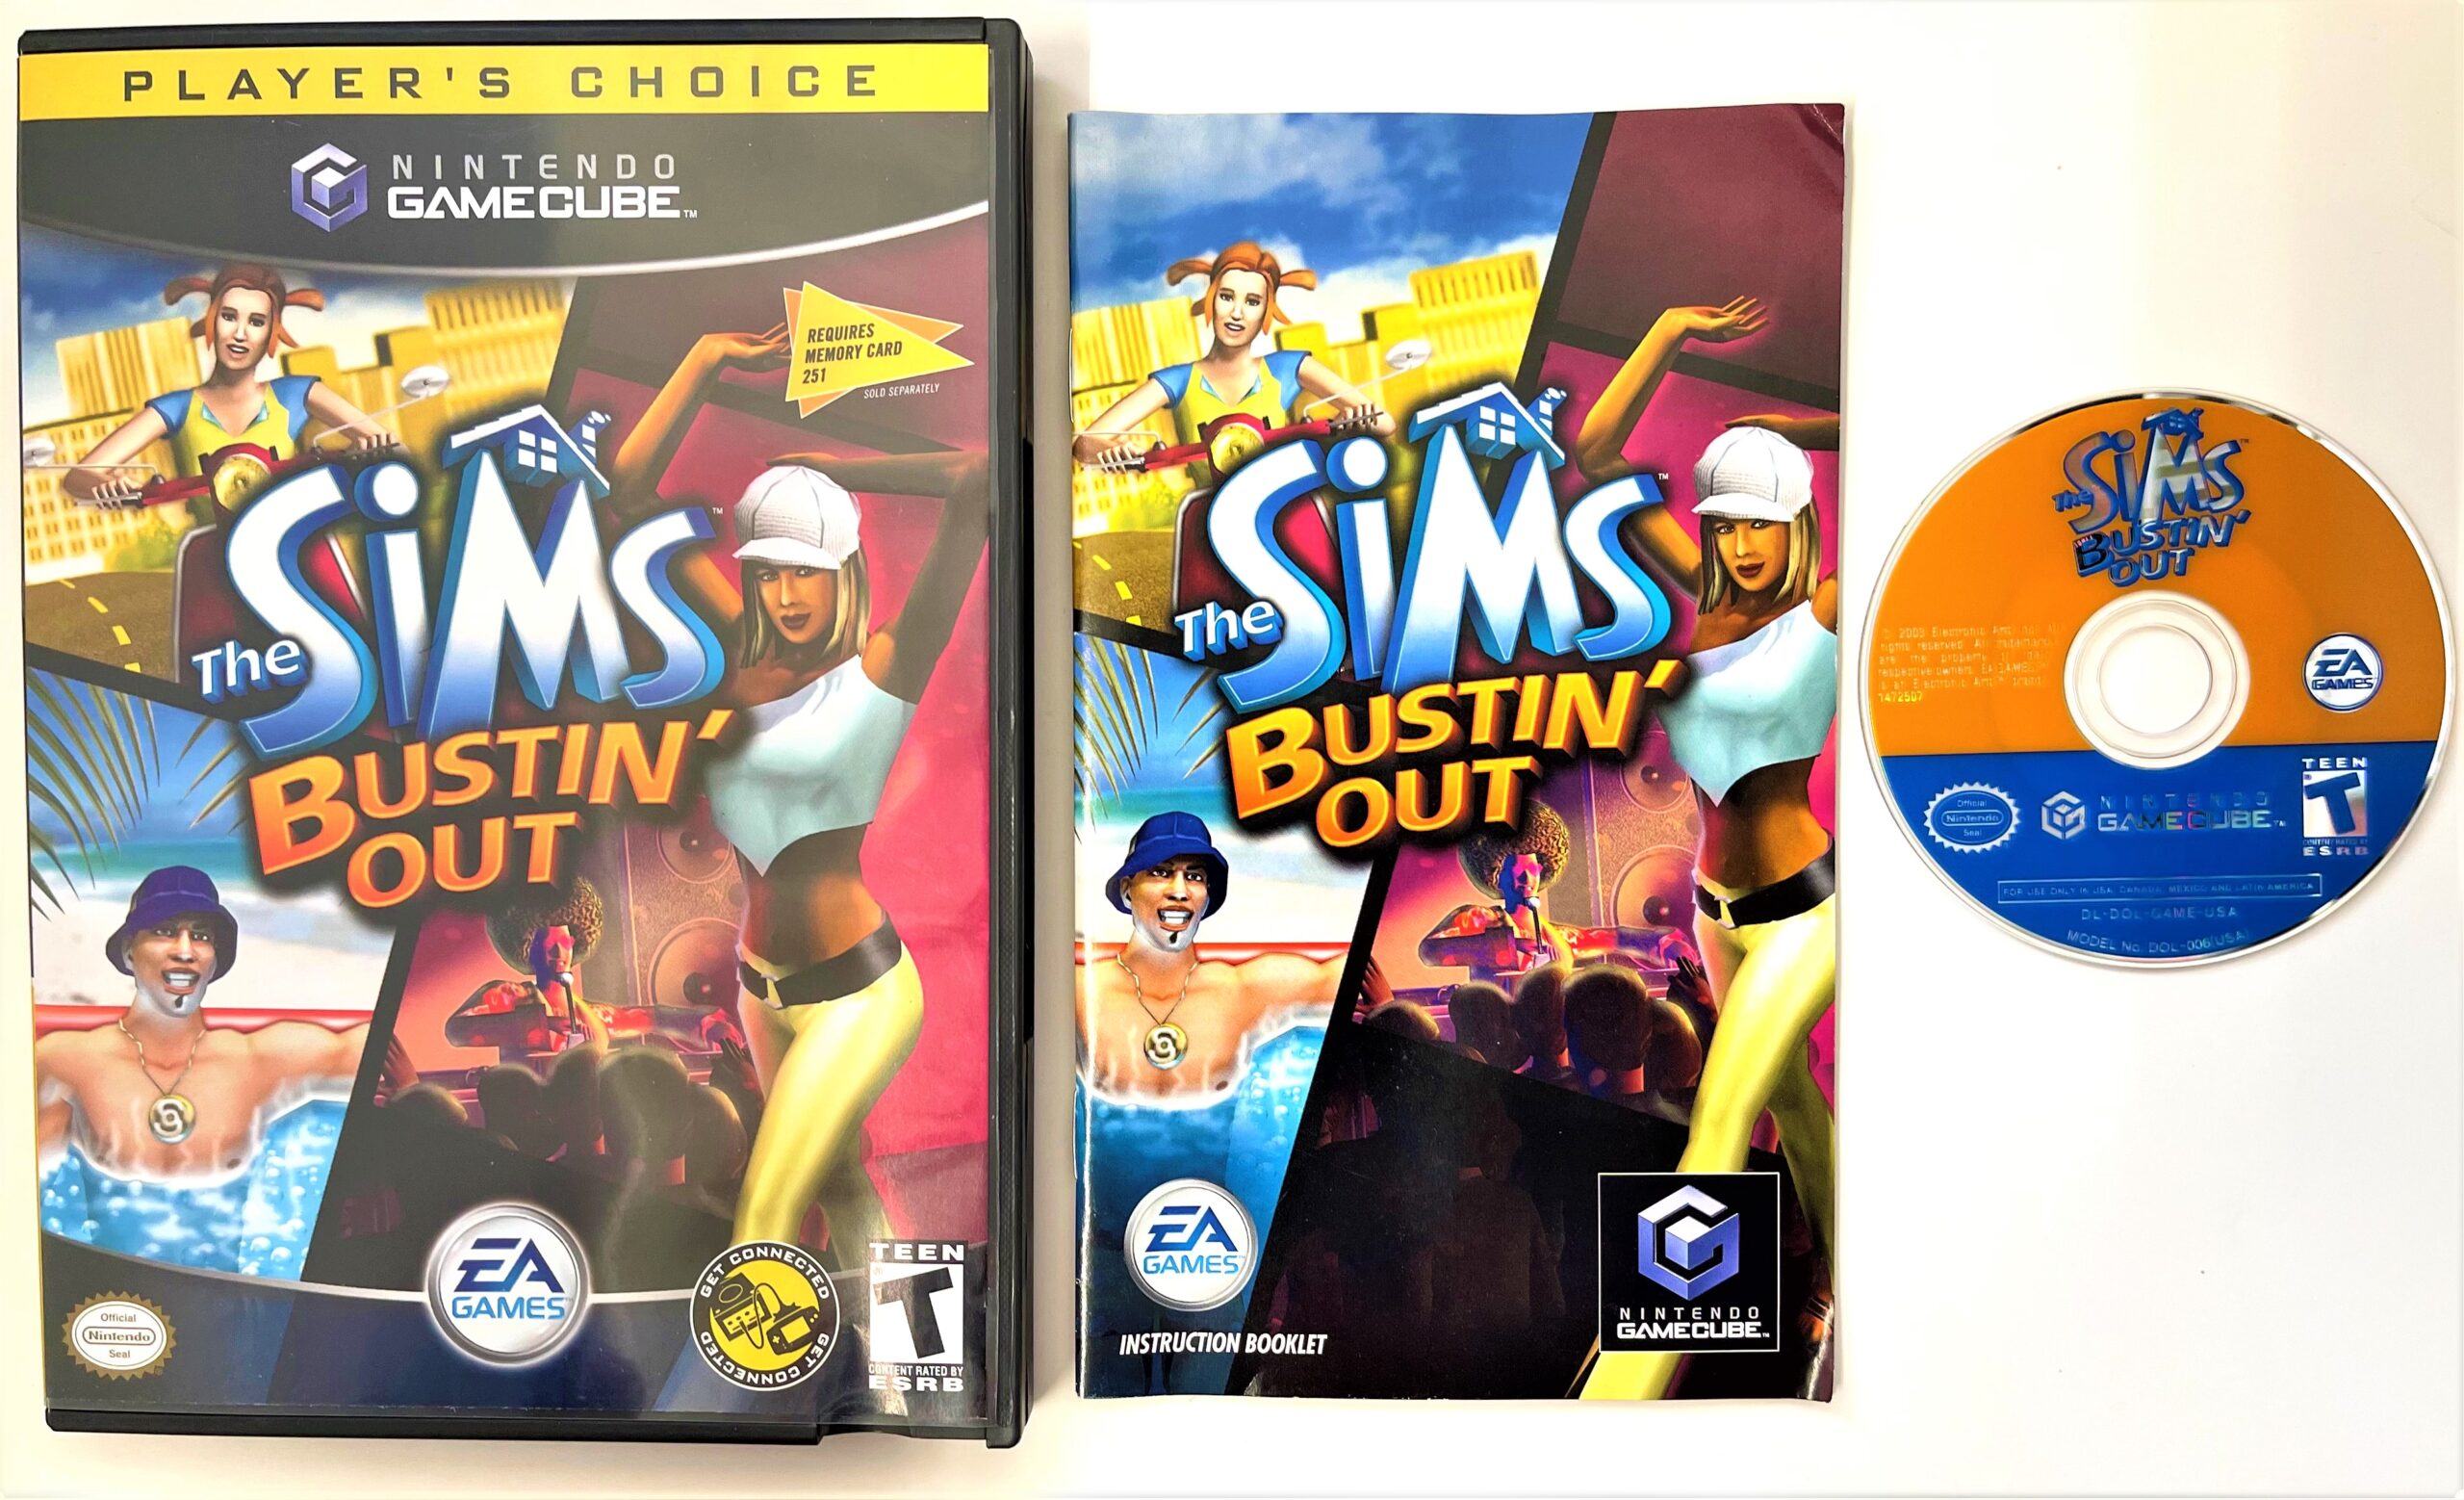 The Sims Bustin' Out (Player's Choice) for Nintendo GameCube